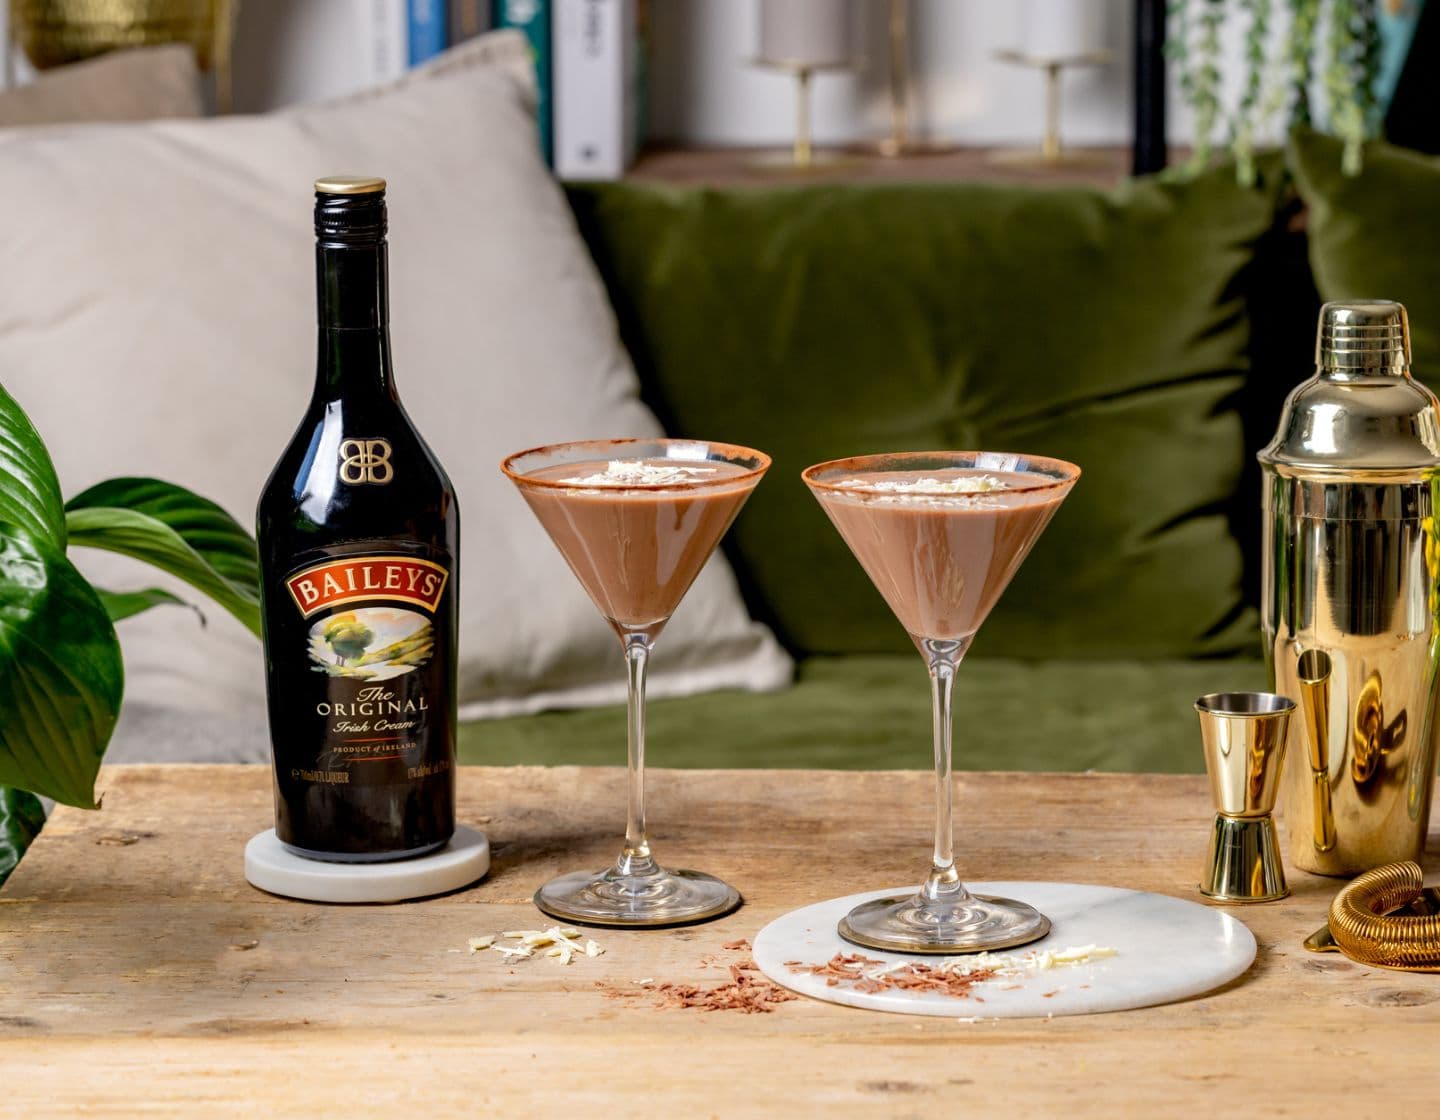 Bottle of Baileys next to two cocktails and cocktail shaker